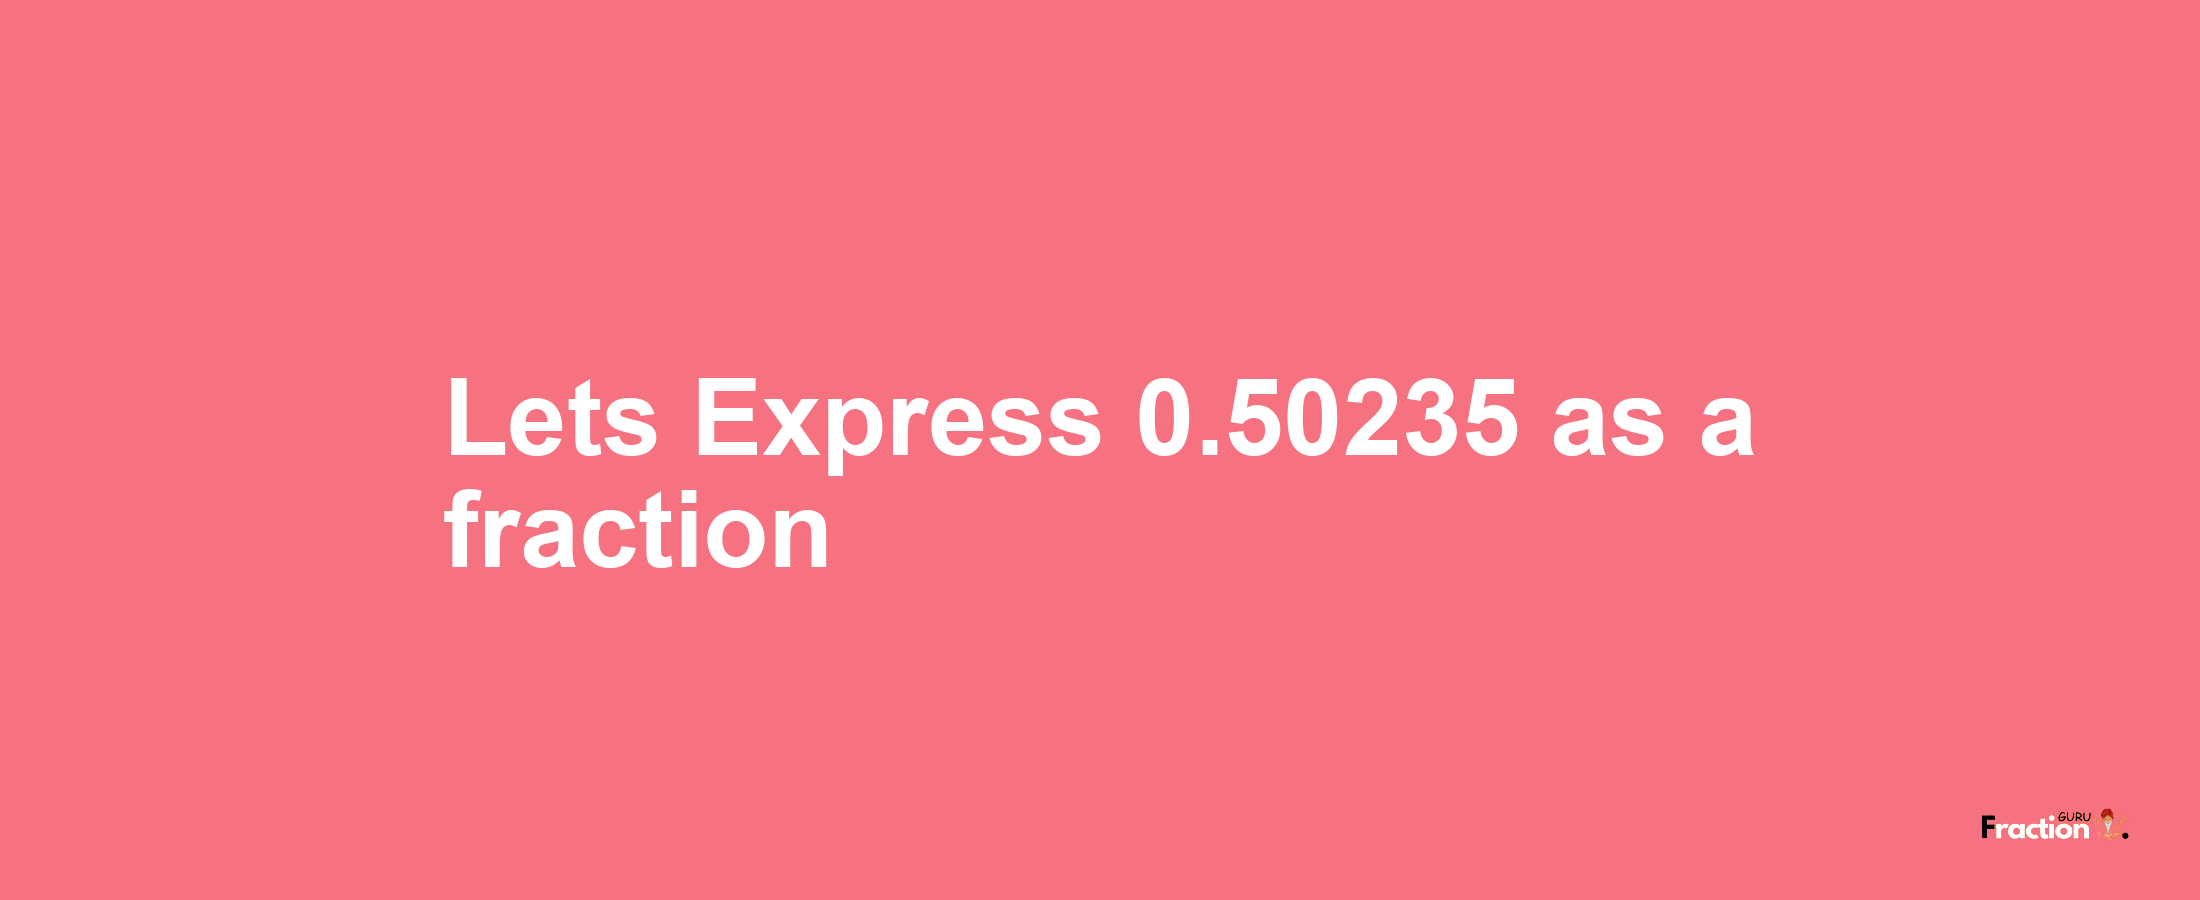 Lets Express 0.50235 as afraction